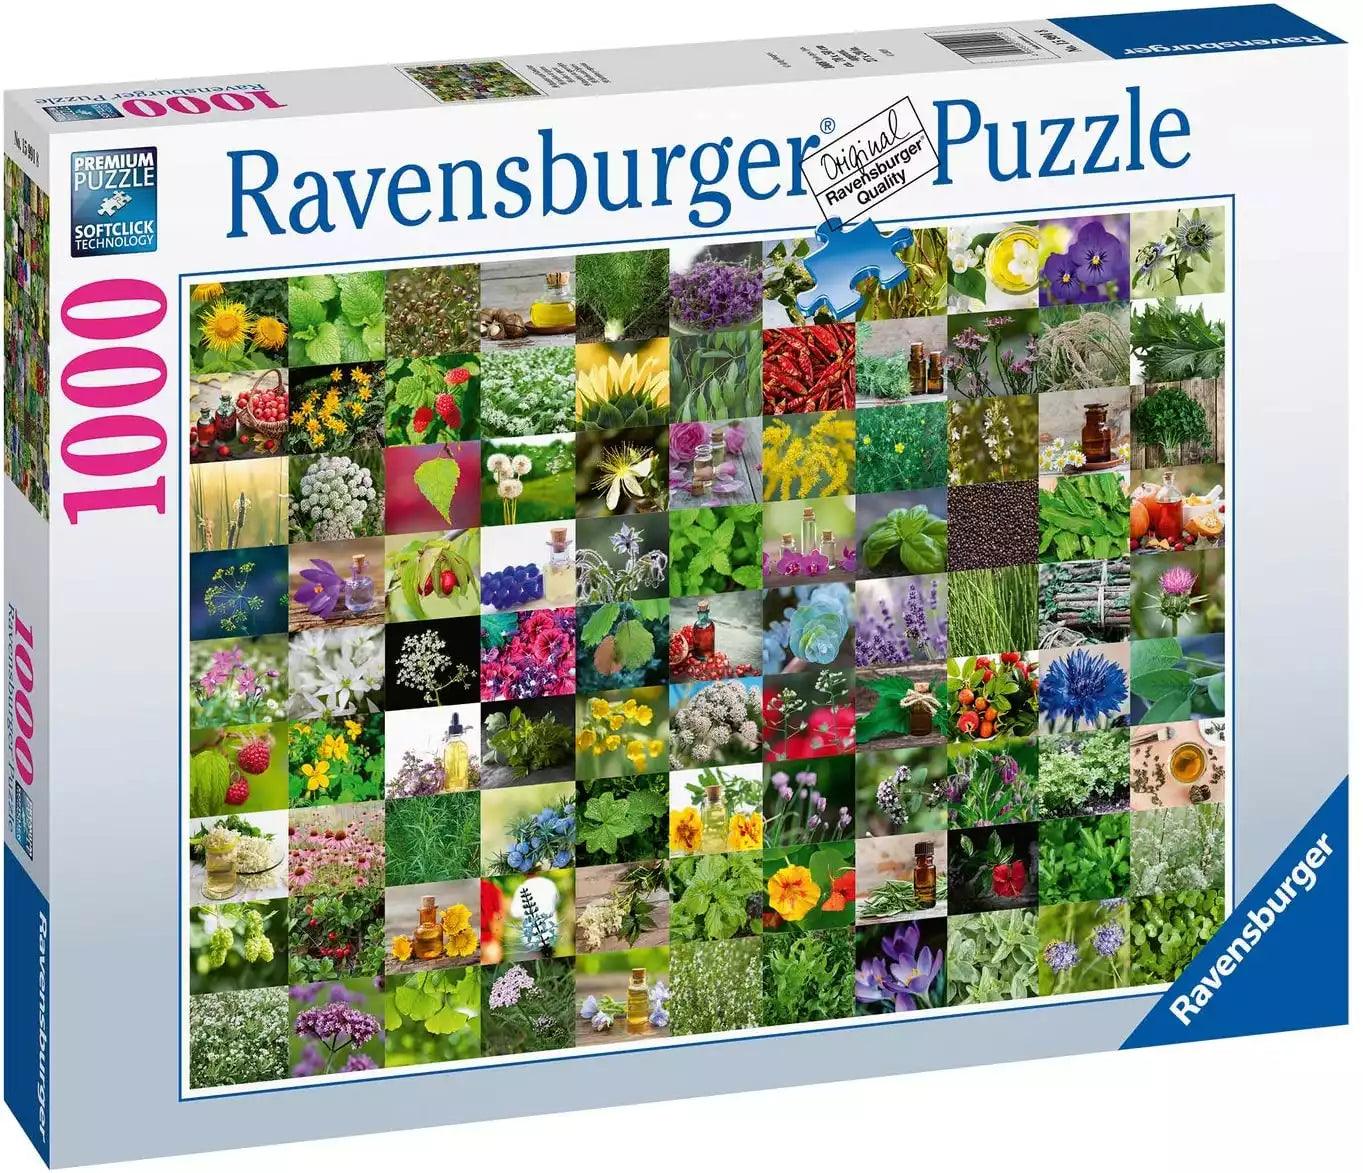 Ravensburger 99 Herbs and Spices Jigsaw Puzzle 1000 Pieces - Eclipse Games Puzzles Novelties